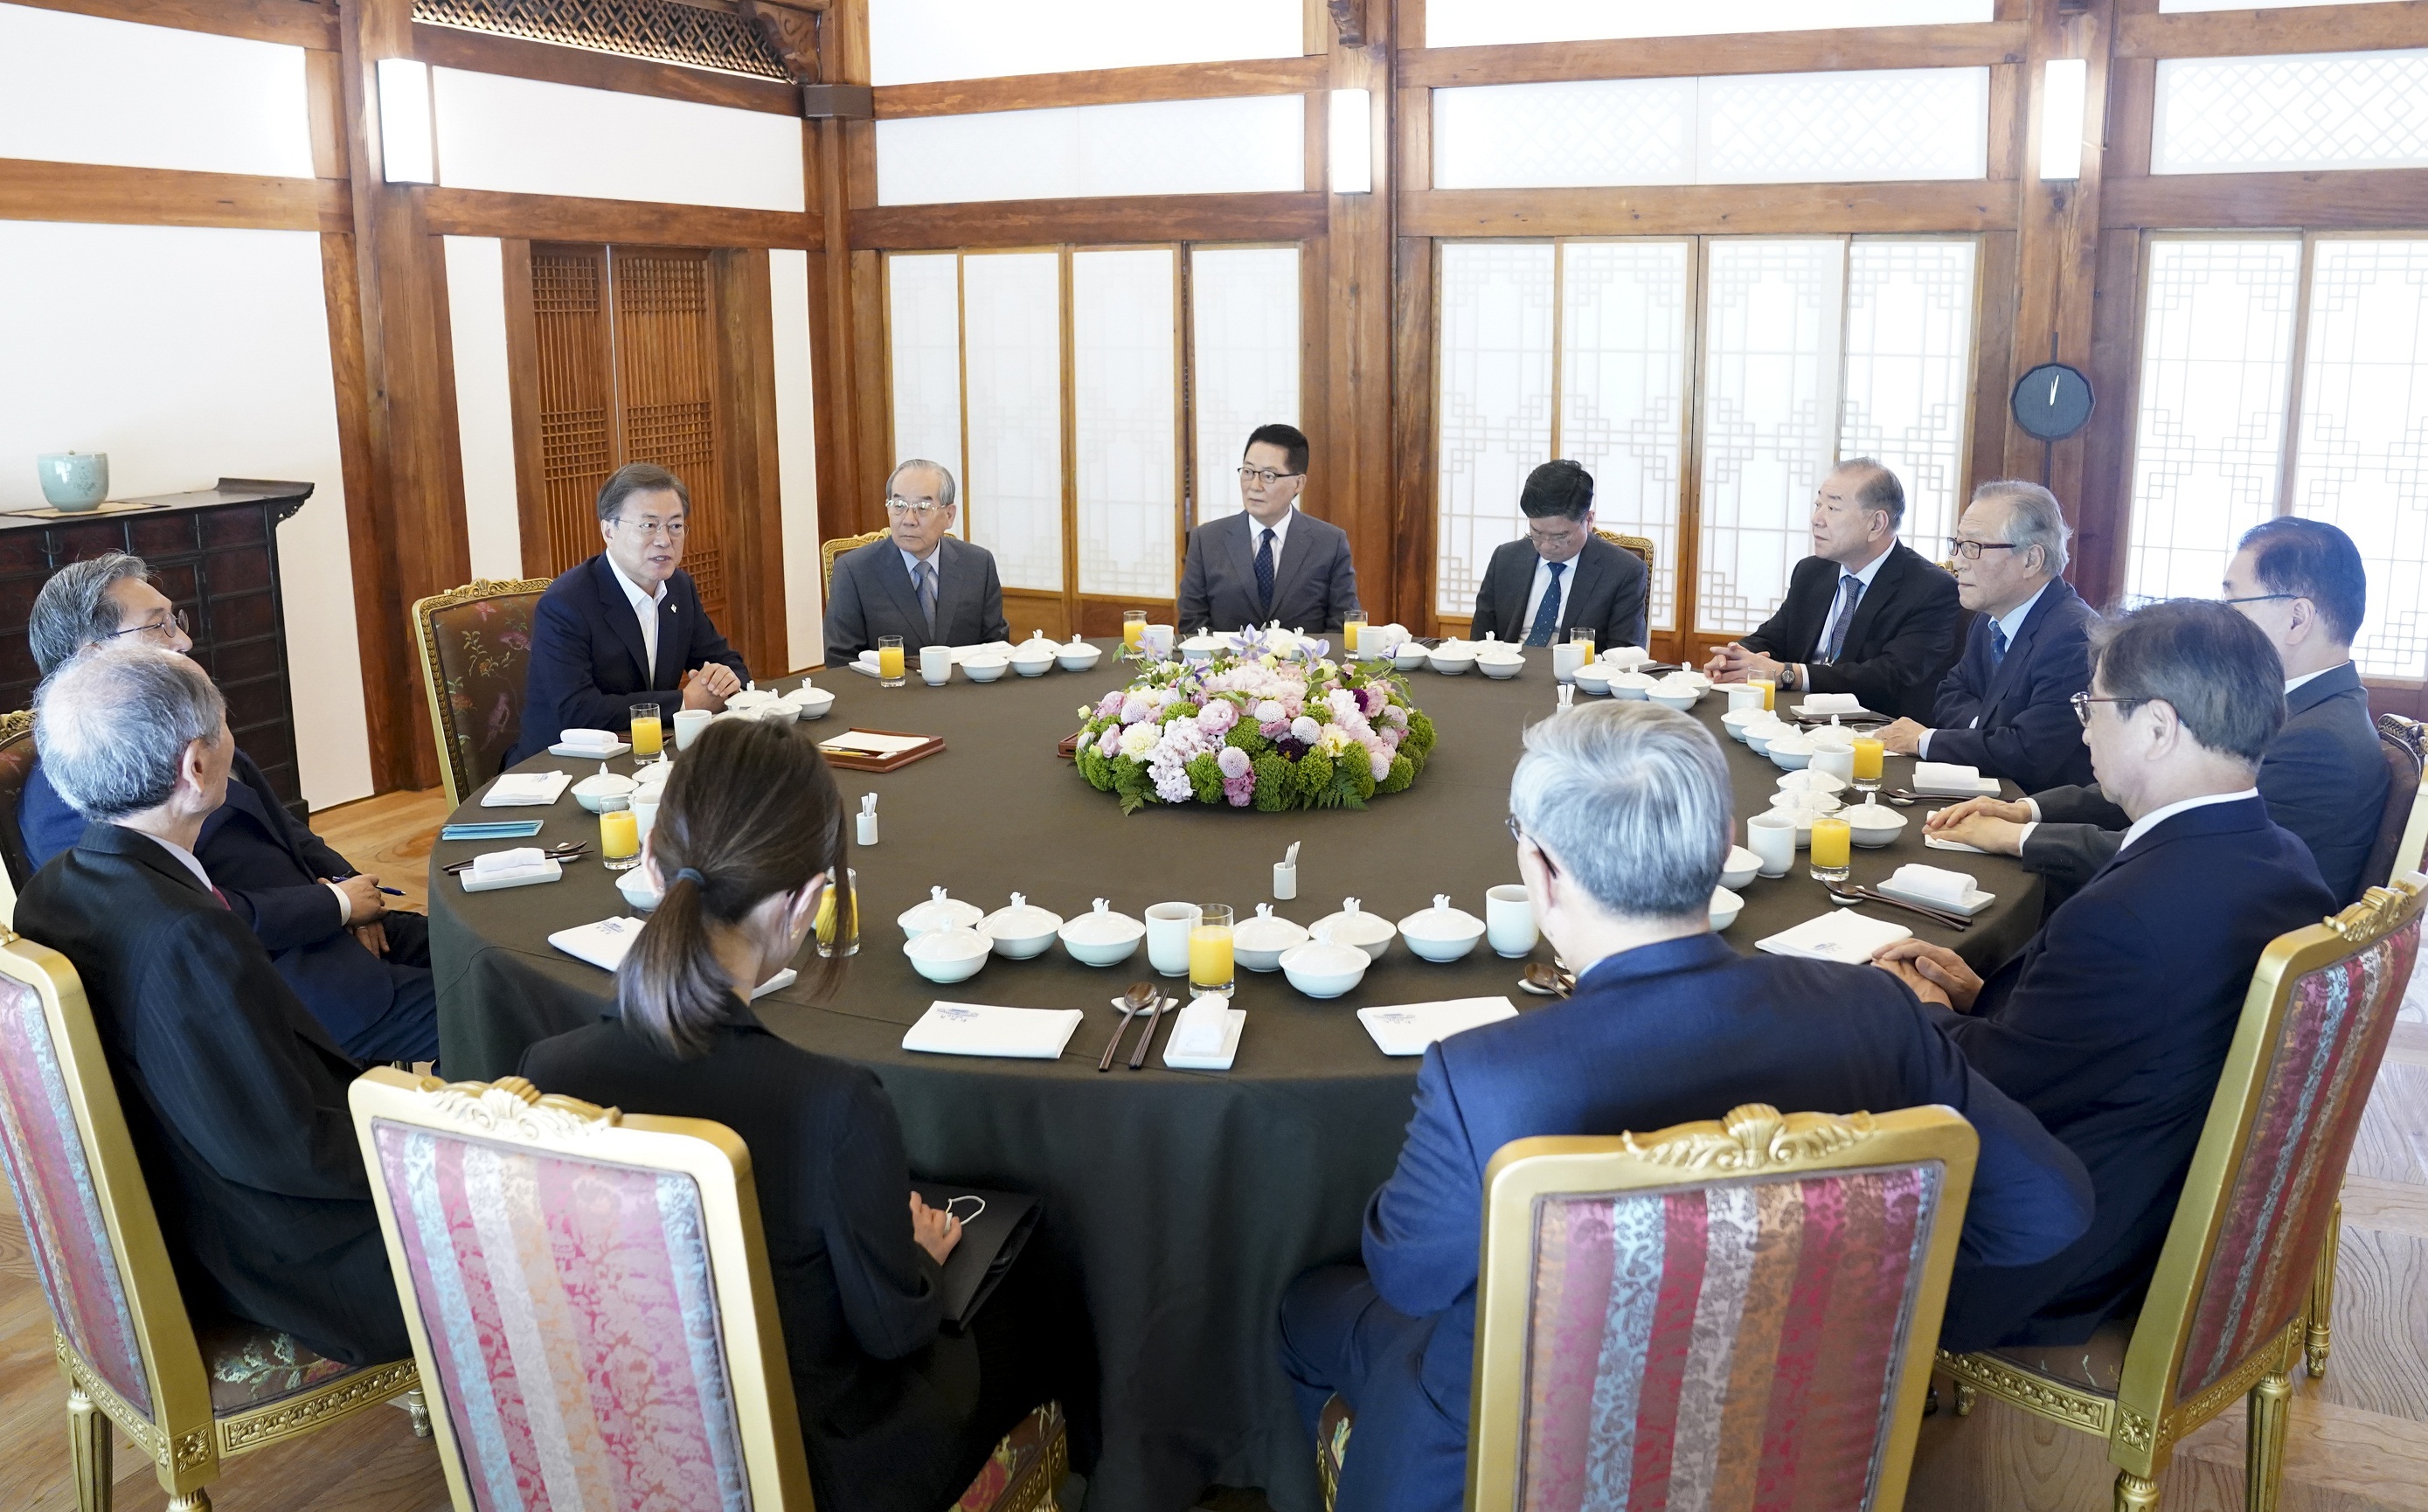 SEOUL, SOUTH KOREA - President Moon Jae-in talks with former Unification ministers who were in charge of inter-Korean relations to discuss deepening problems in inter-Korean relations at the Cheong Wa Dae presidential office in Seoul, South Korea. South on Wednesday, June 17, 2020, a day after North Korea detonated the Kaesong inter-Korean liaison office. (NO RESALE)